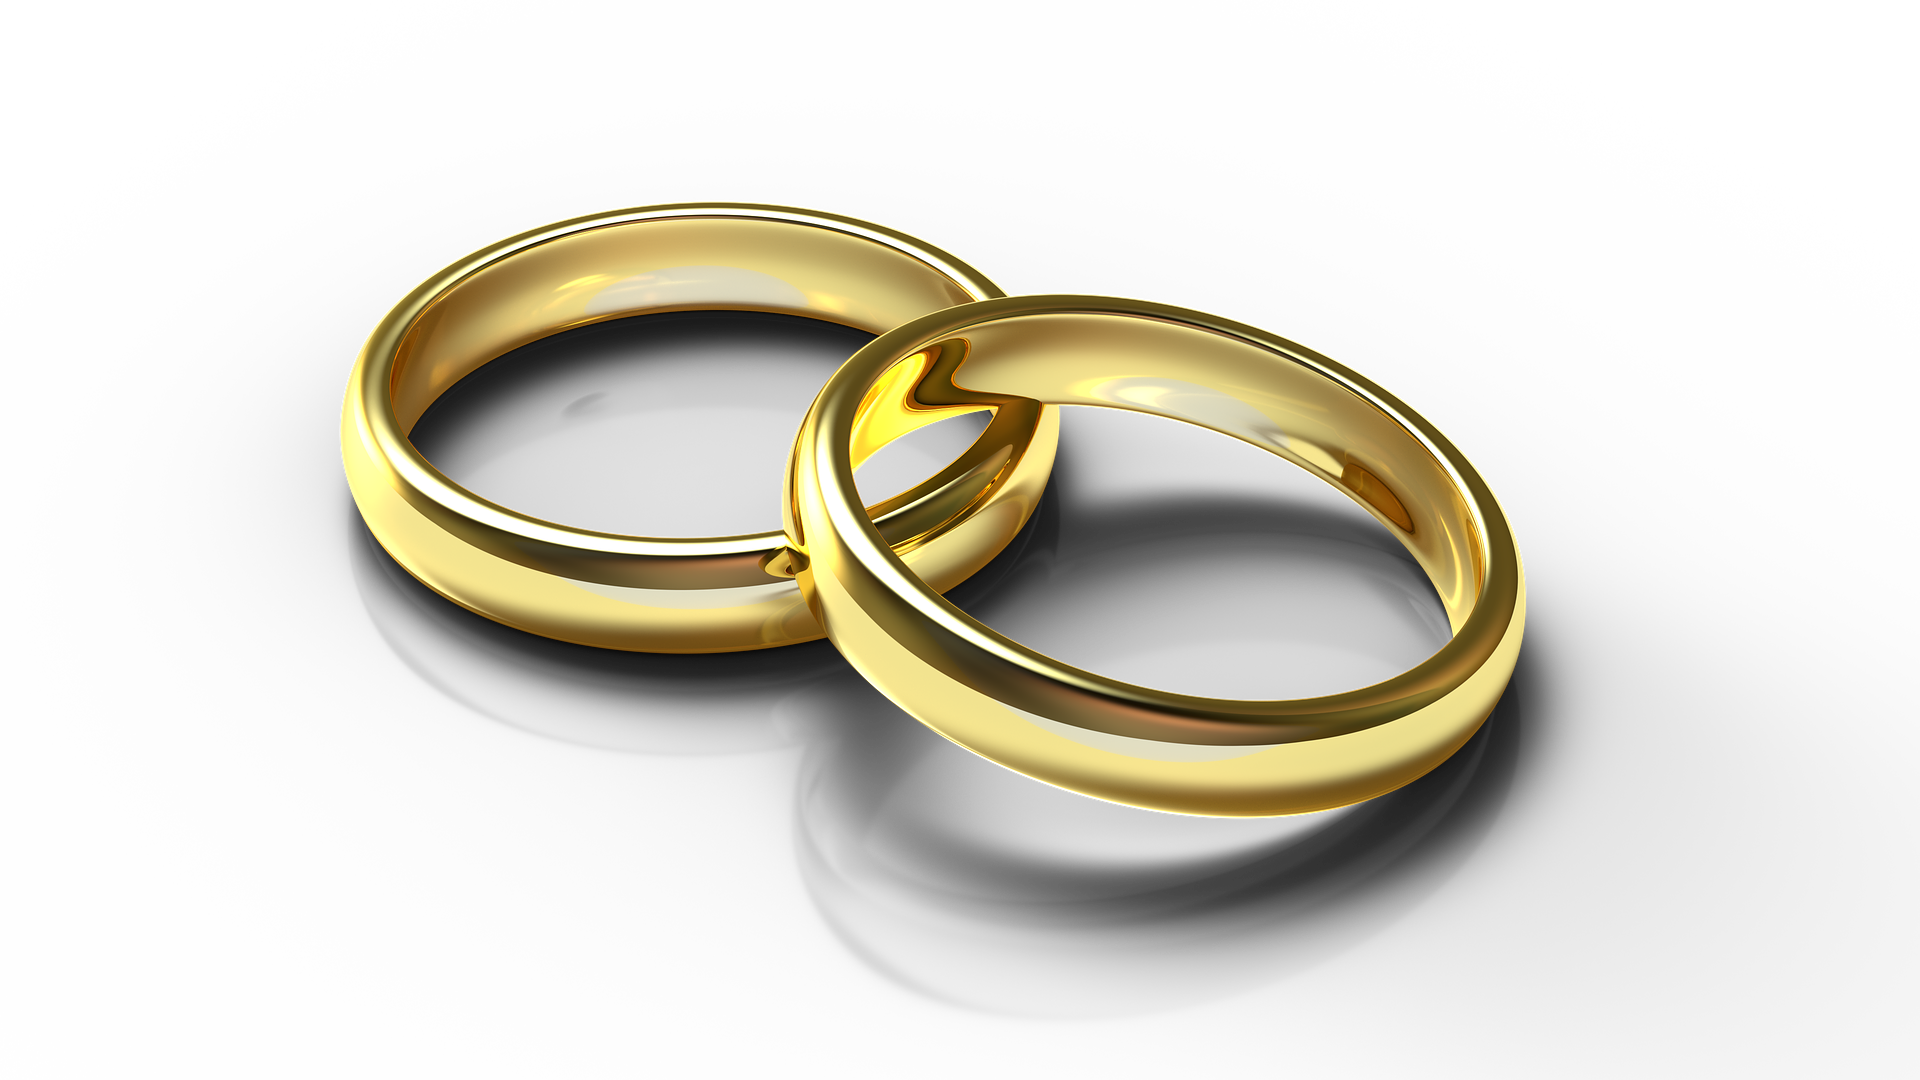 How Much Are Gold Wedding Bands Worth?